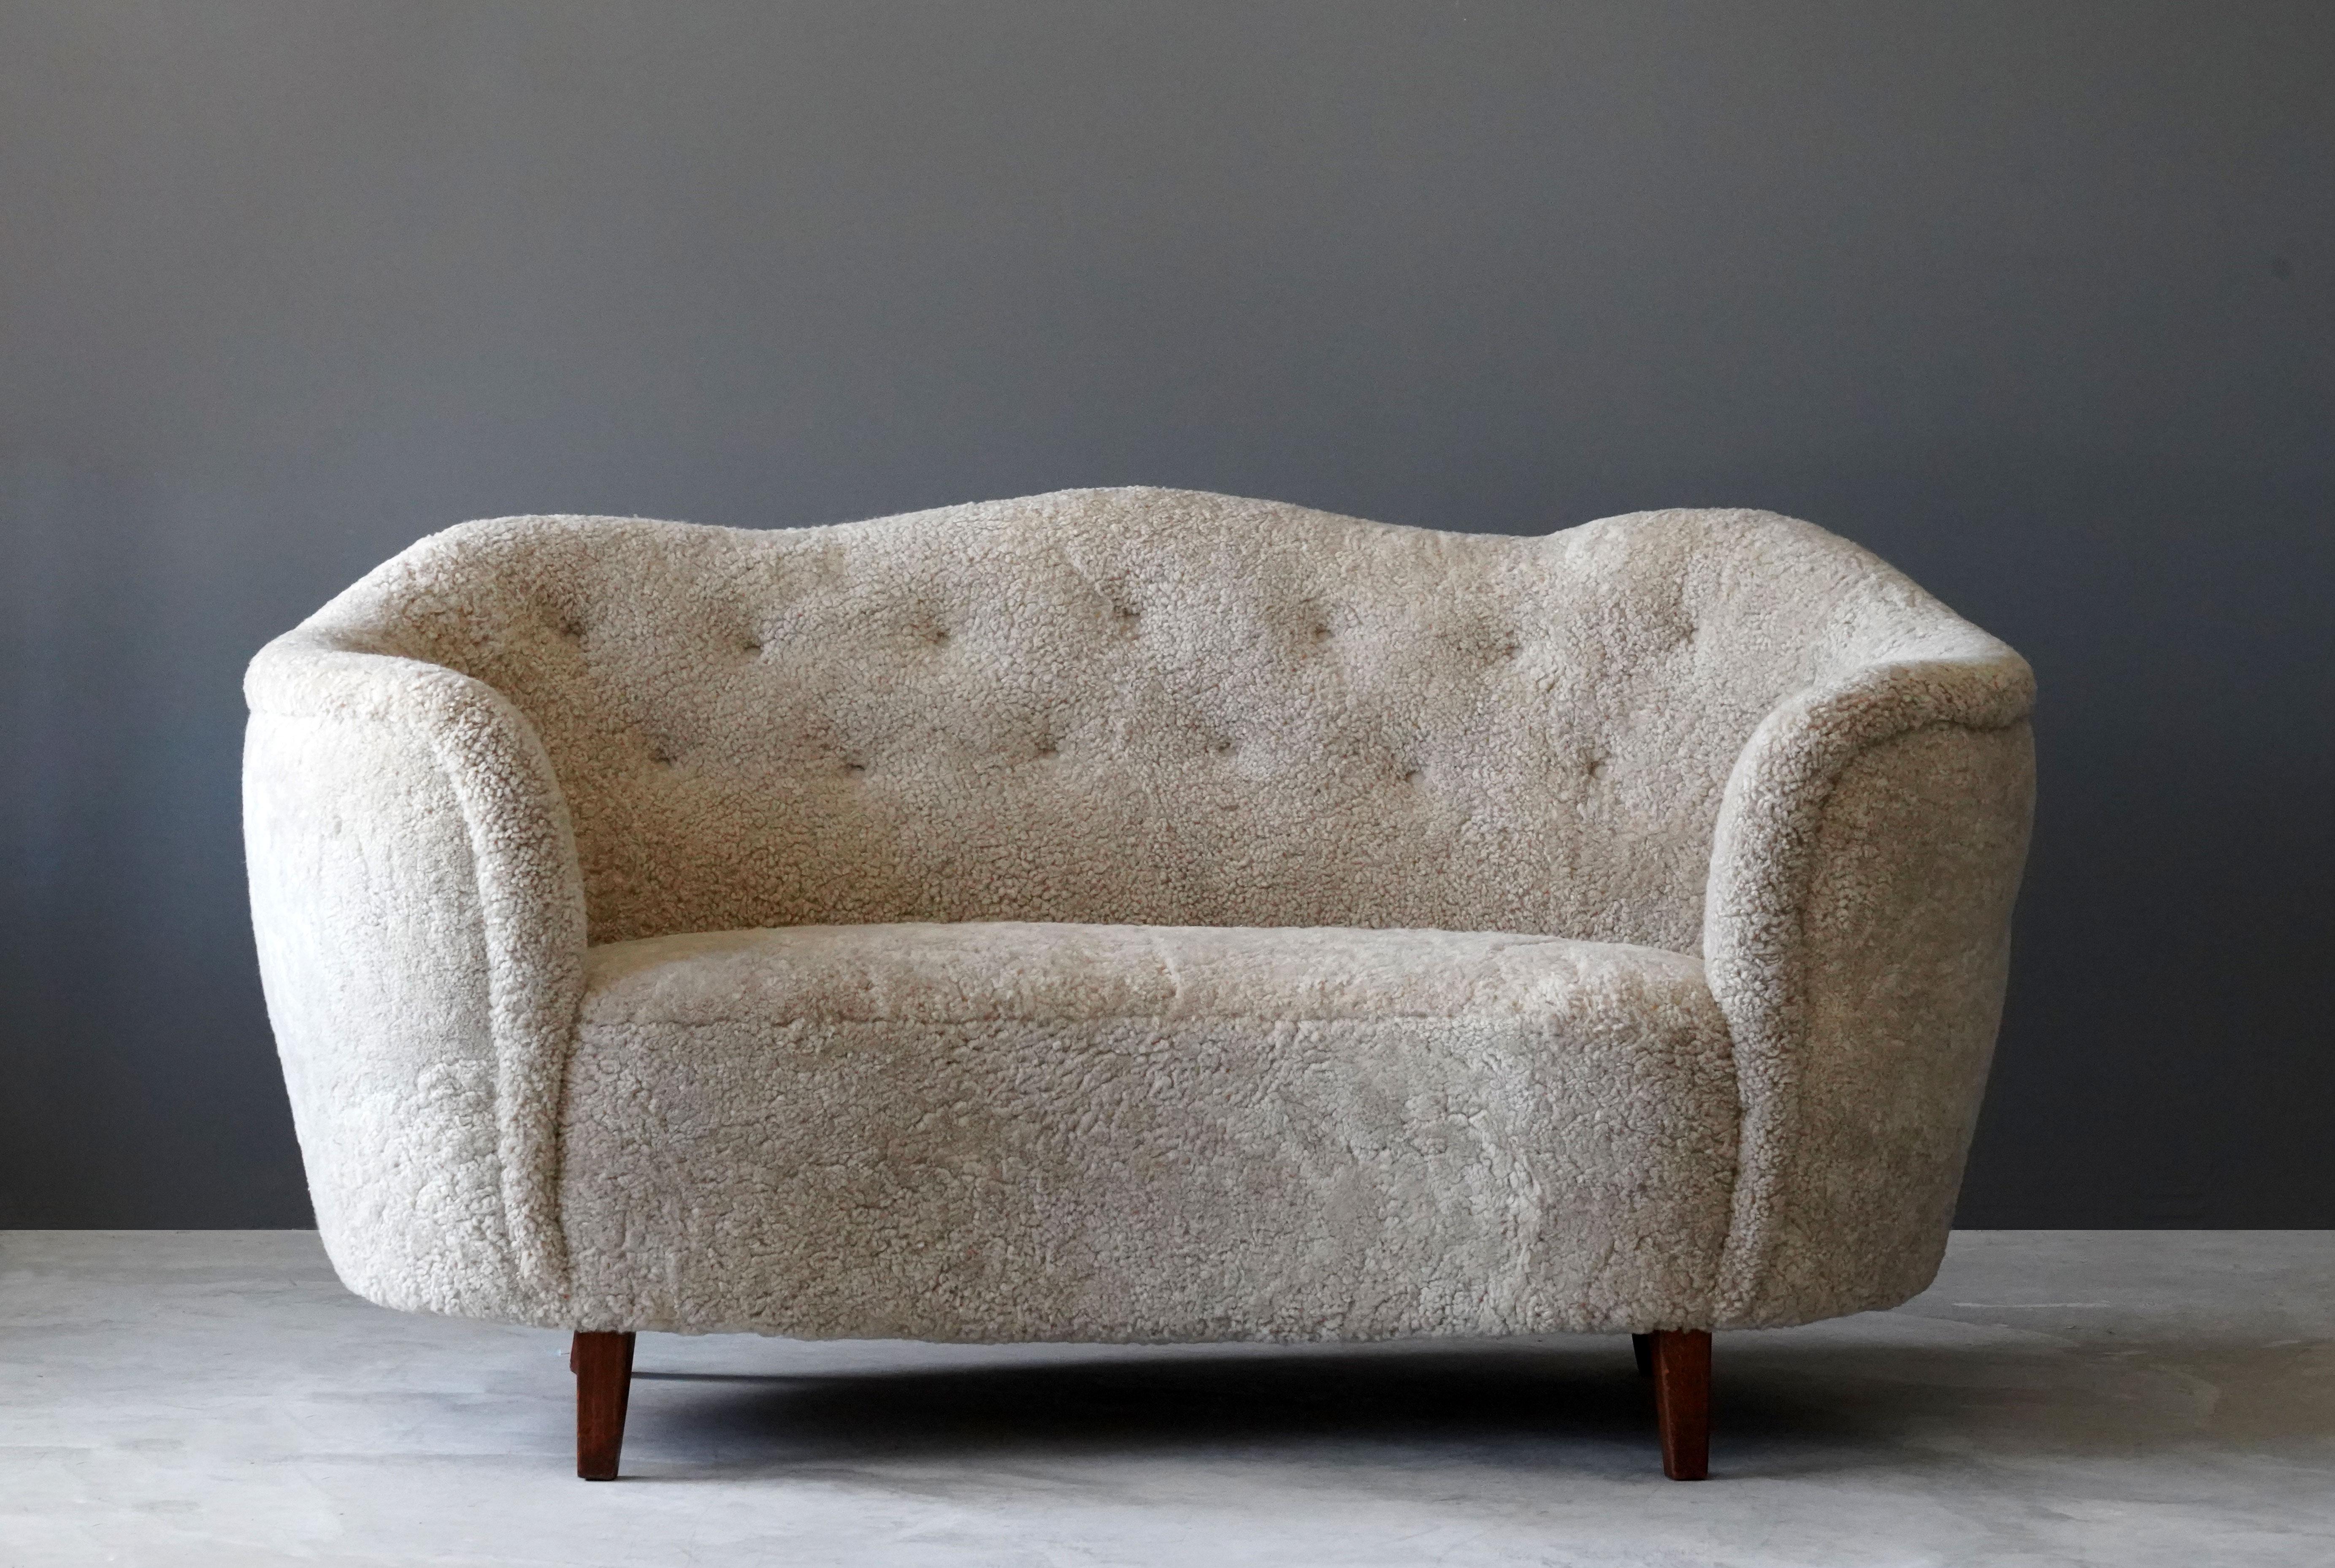 An early Danish modernist sofa / loveseat with an organic form. Design attributed to Agner Christoffersen. Reference image available upon request. 

Presumably manufactured by N,C. Christoffersen, circa 1949, Denmark. 

 Other designers working